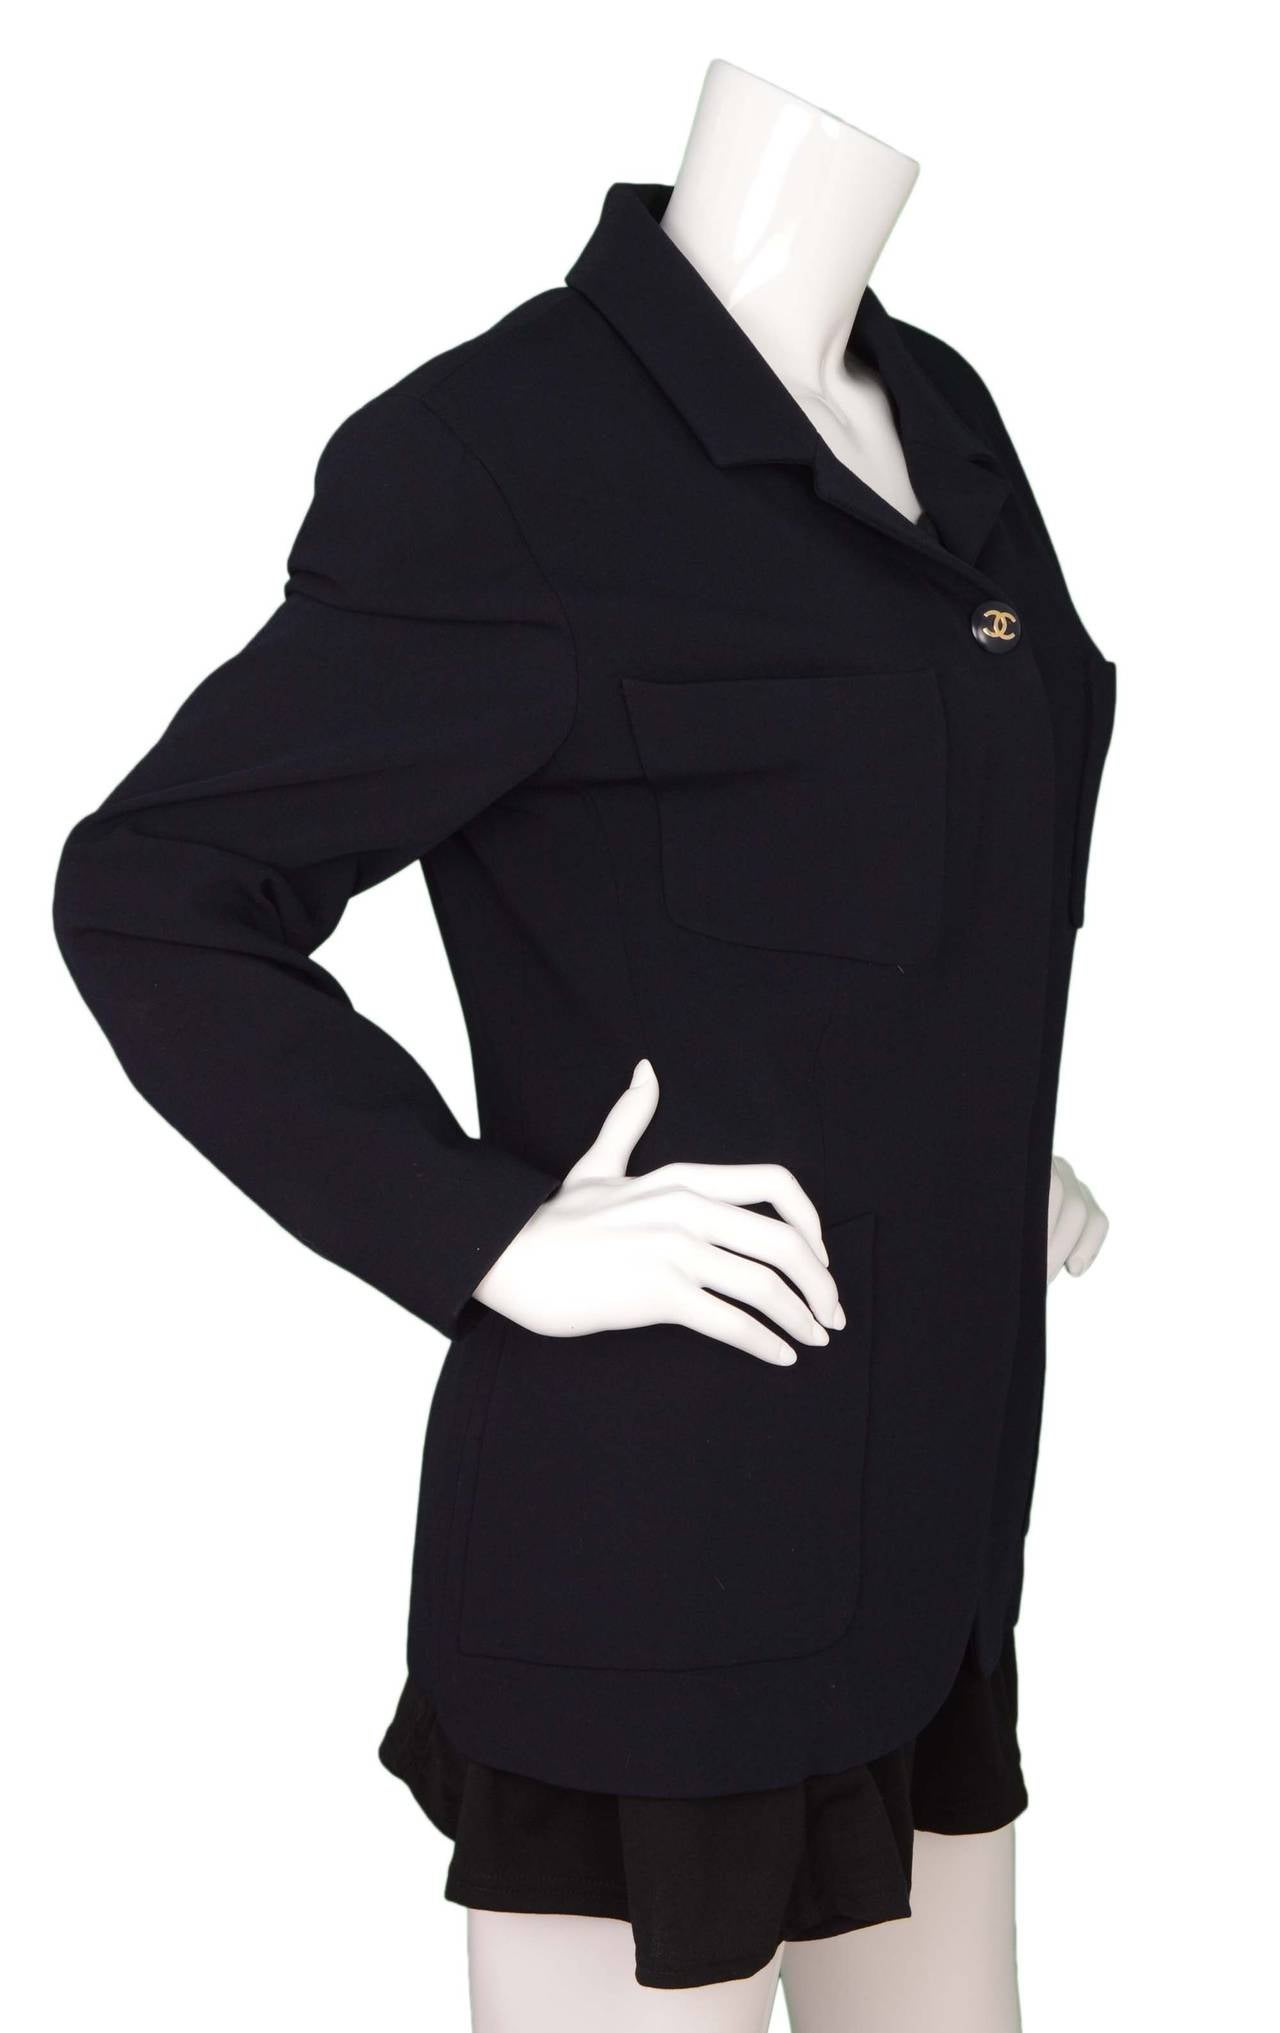 Chanel Navy Single-Breasted Jacket 
Features navy resin and silvertone CC buttons
Made in: France
Color: Navy
Composition: Not given- believed to be a wool blend
Lining: Navy, believed to be 100% silk
Closure/opening: Front and center button